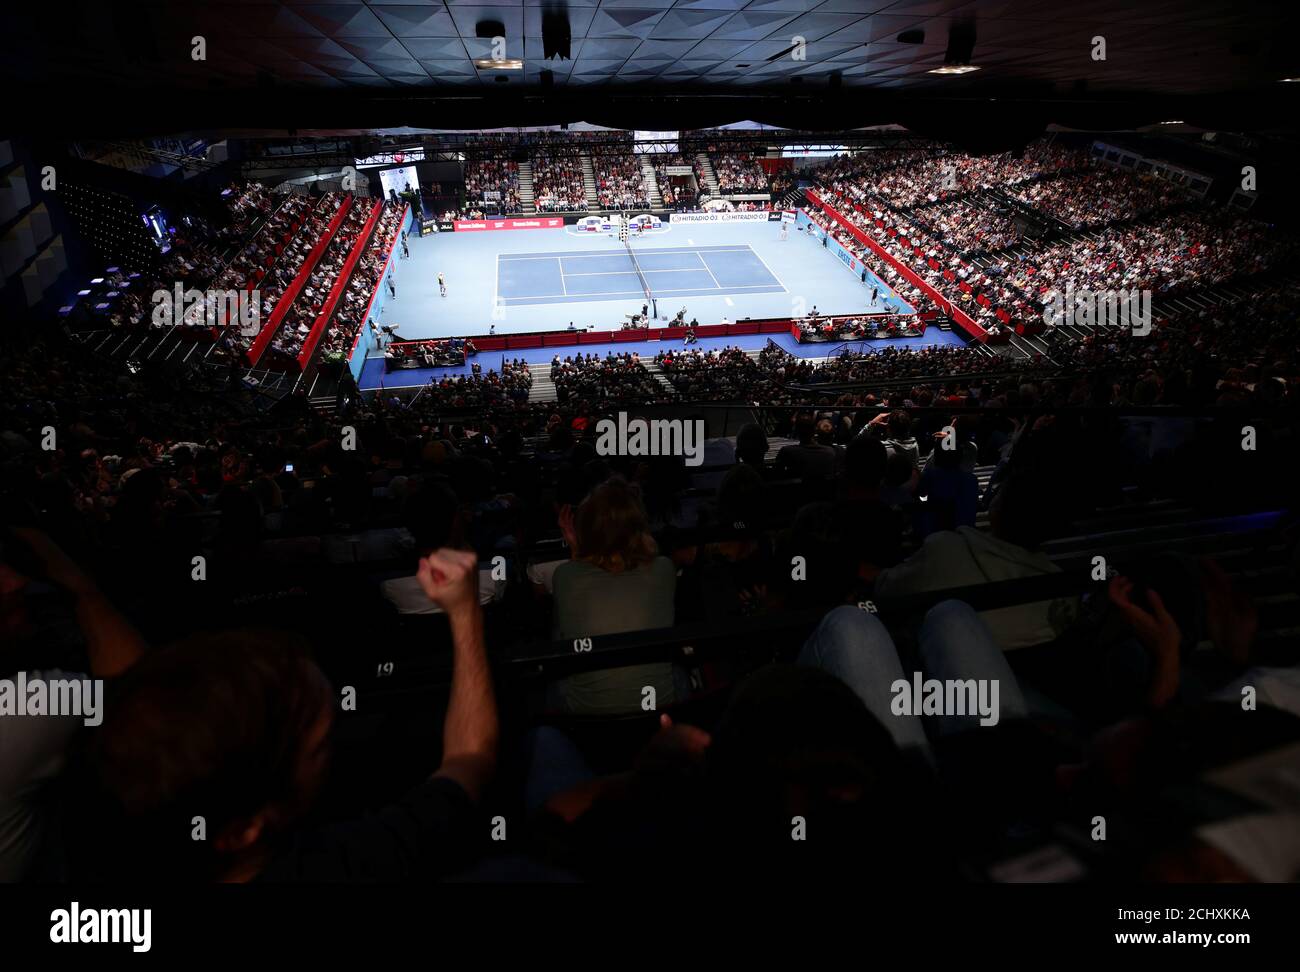 Tennis - ATP 500 - Vienna Open - Wiener Stadthalle, Vienna, Austria -  October 26, 2019 General view during the semi final match between Austria's  Dominic Thiem and Italy's Matteo Berrettini REUTERS/Lisi Niesner Stock  Photo - Alamy